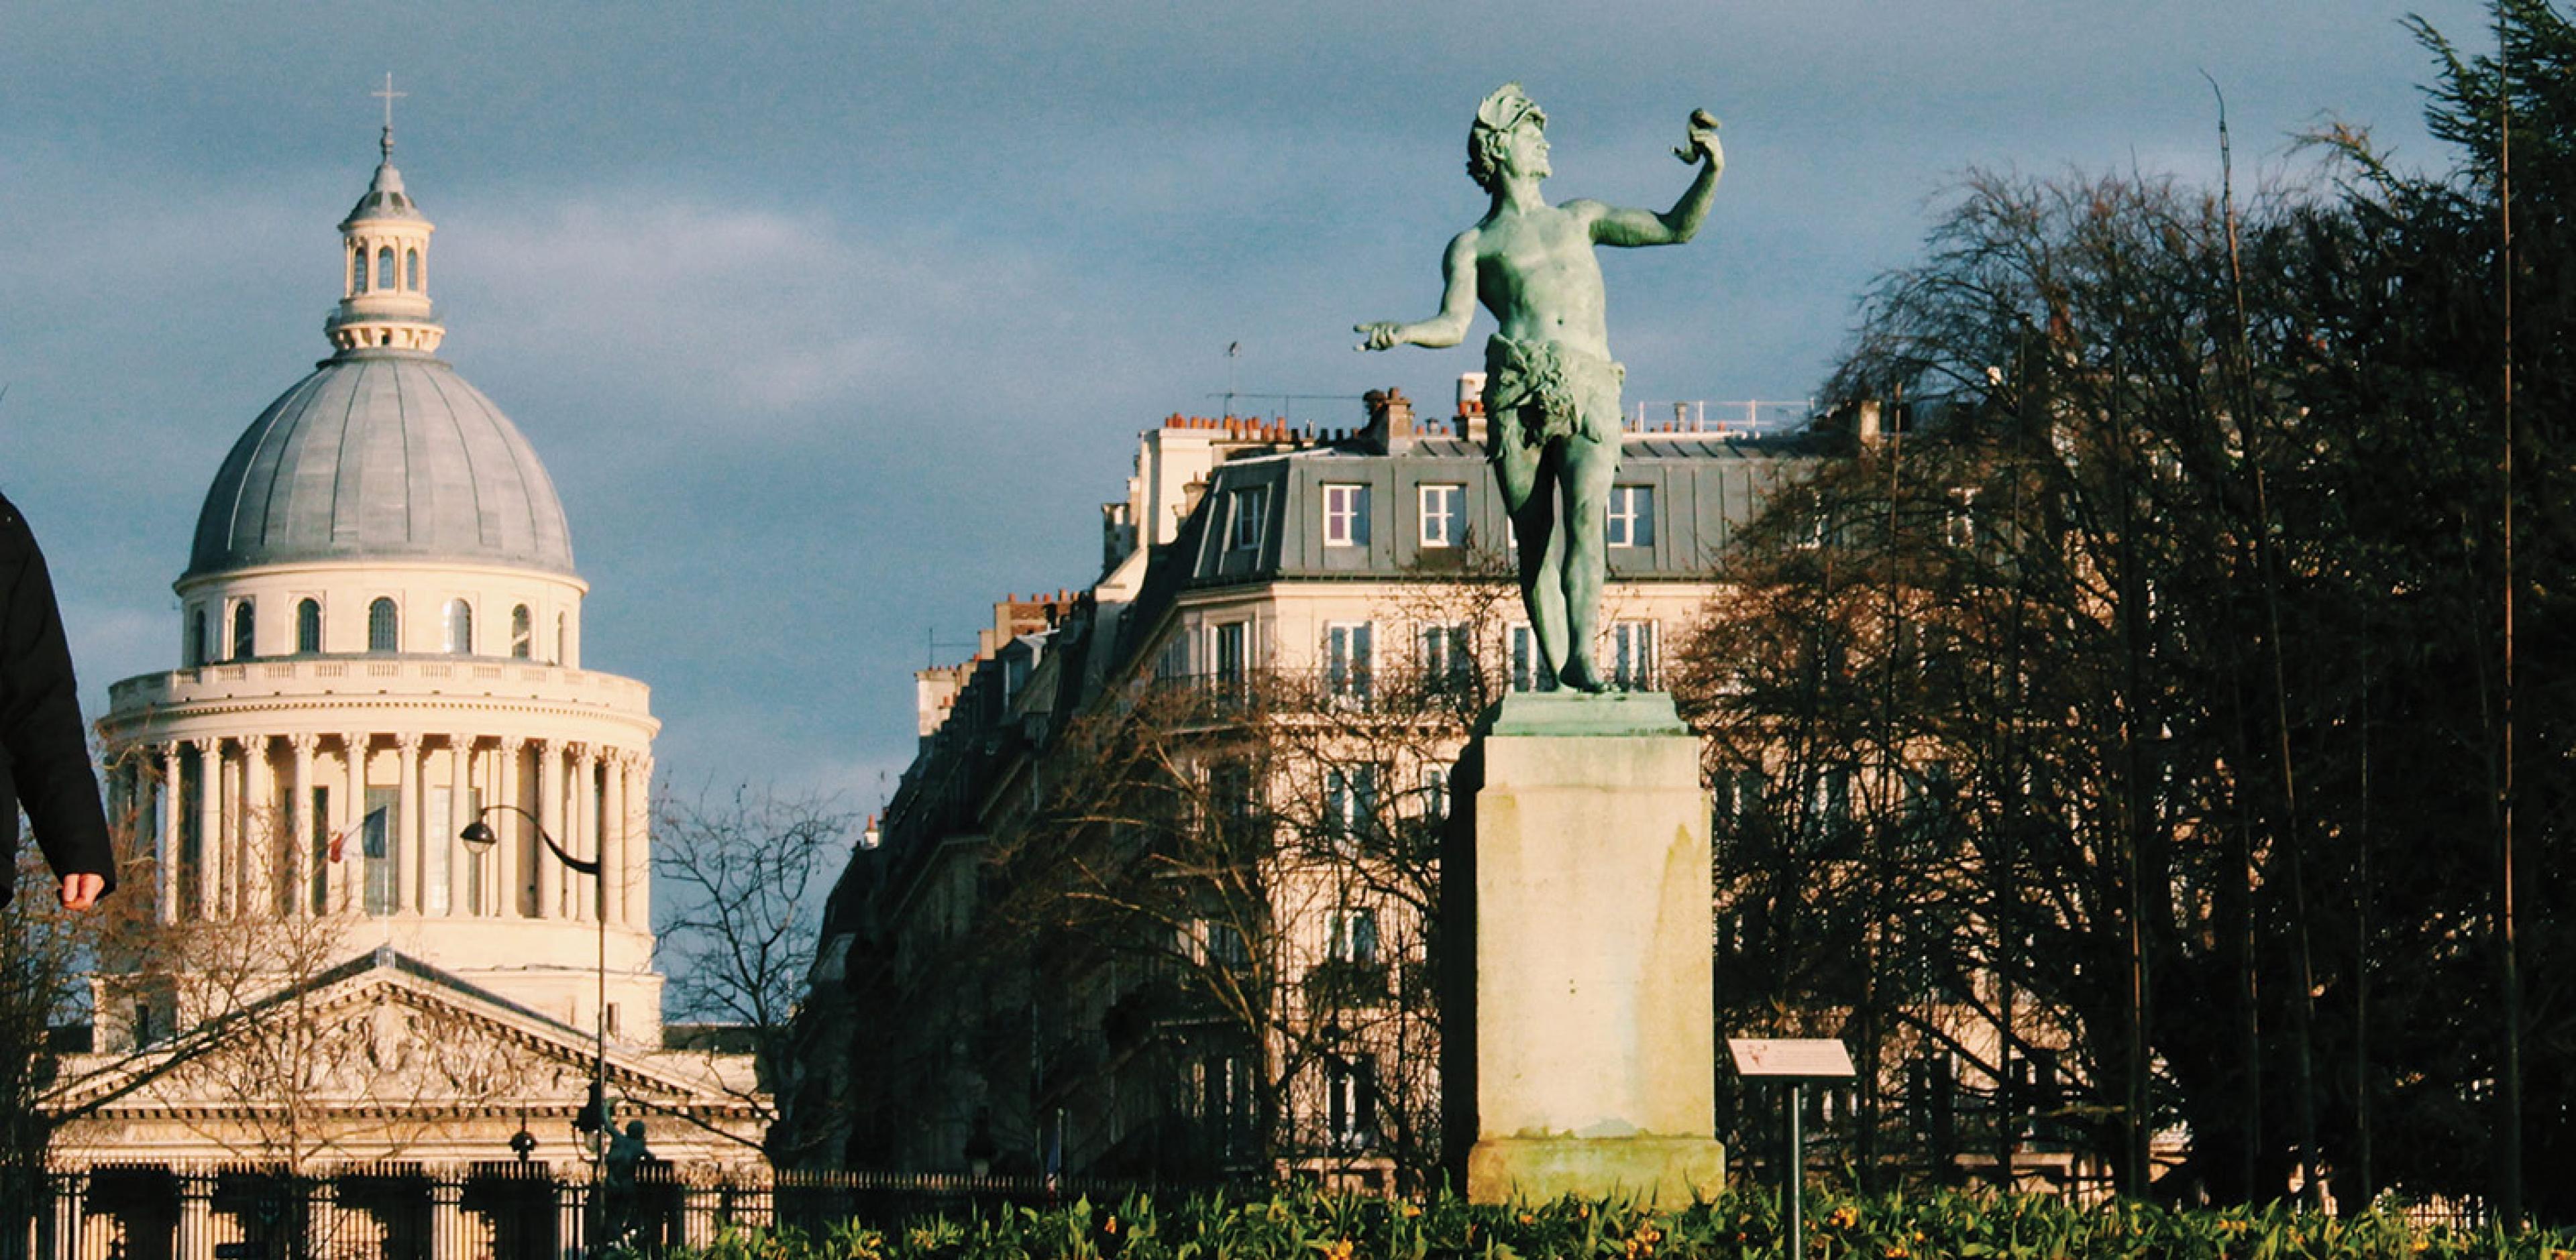 statue of greek figure in paris with pantheon building seen in background